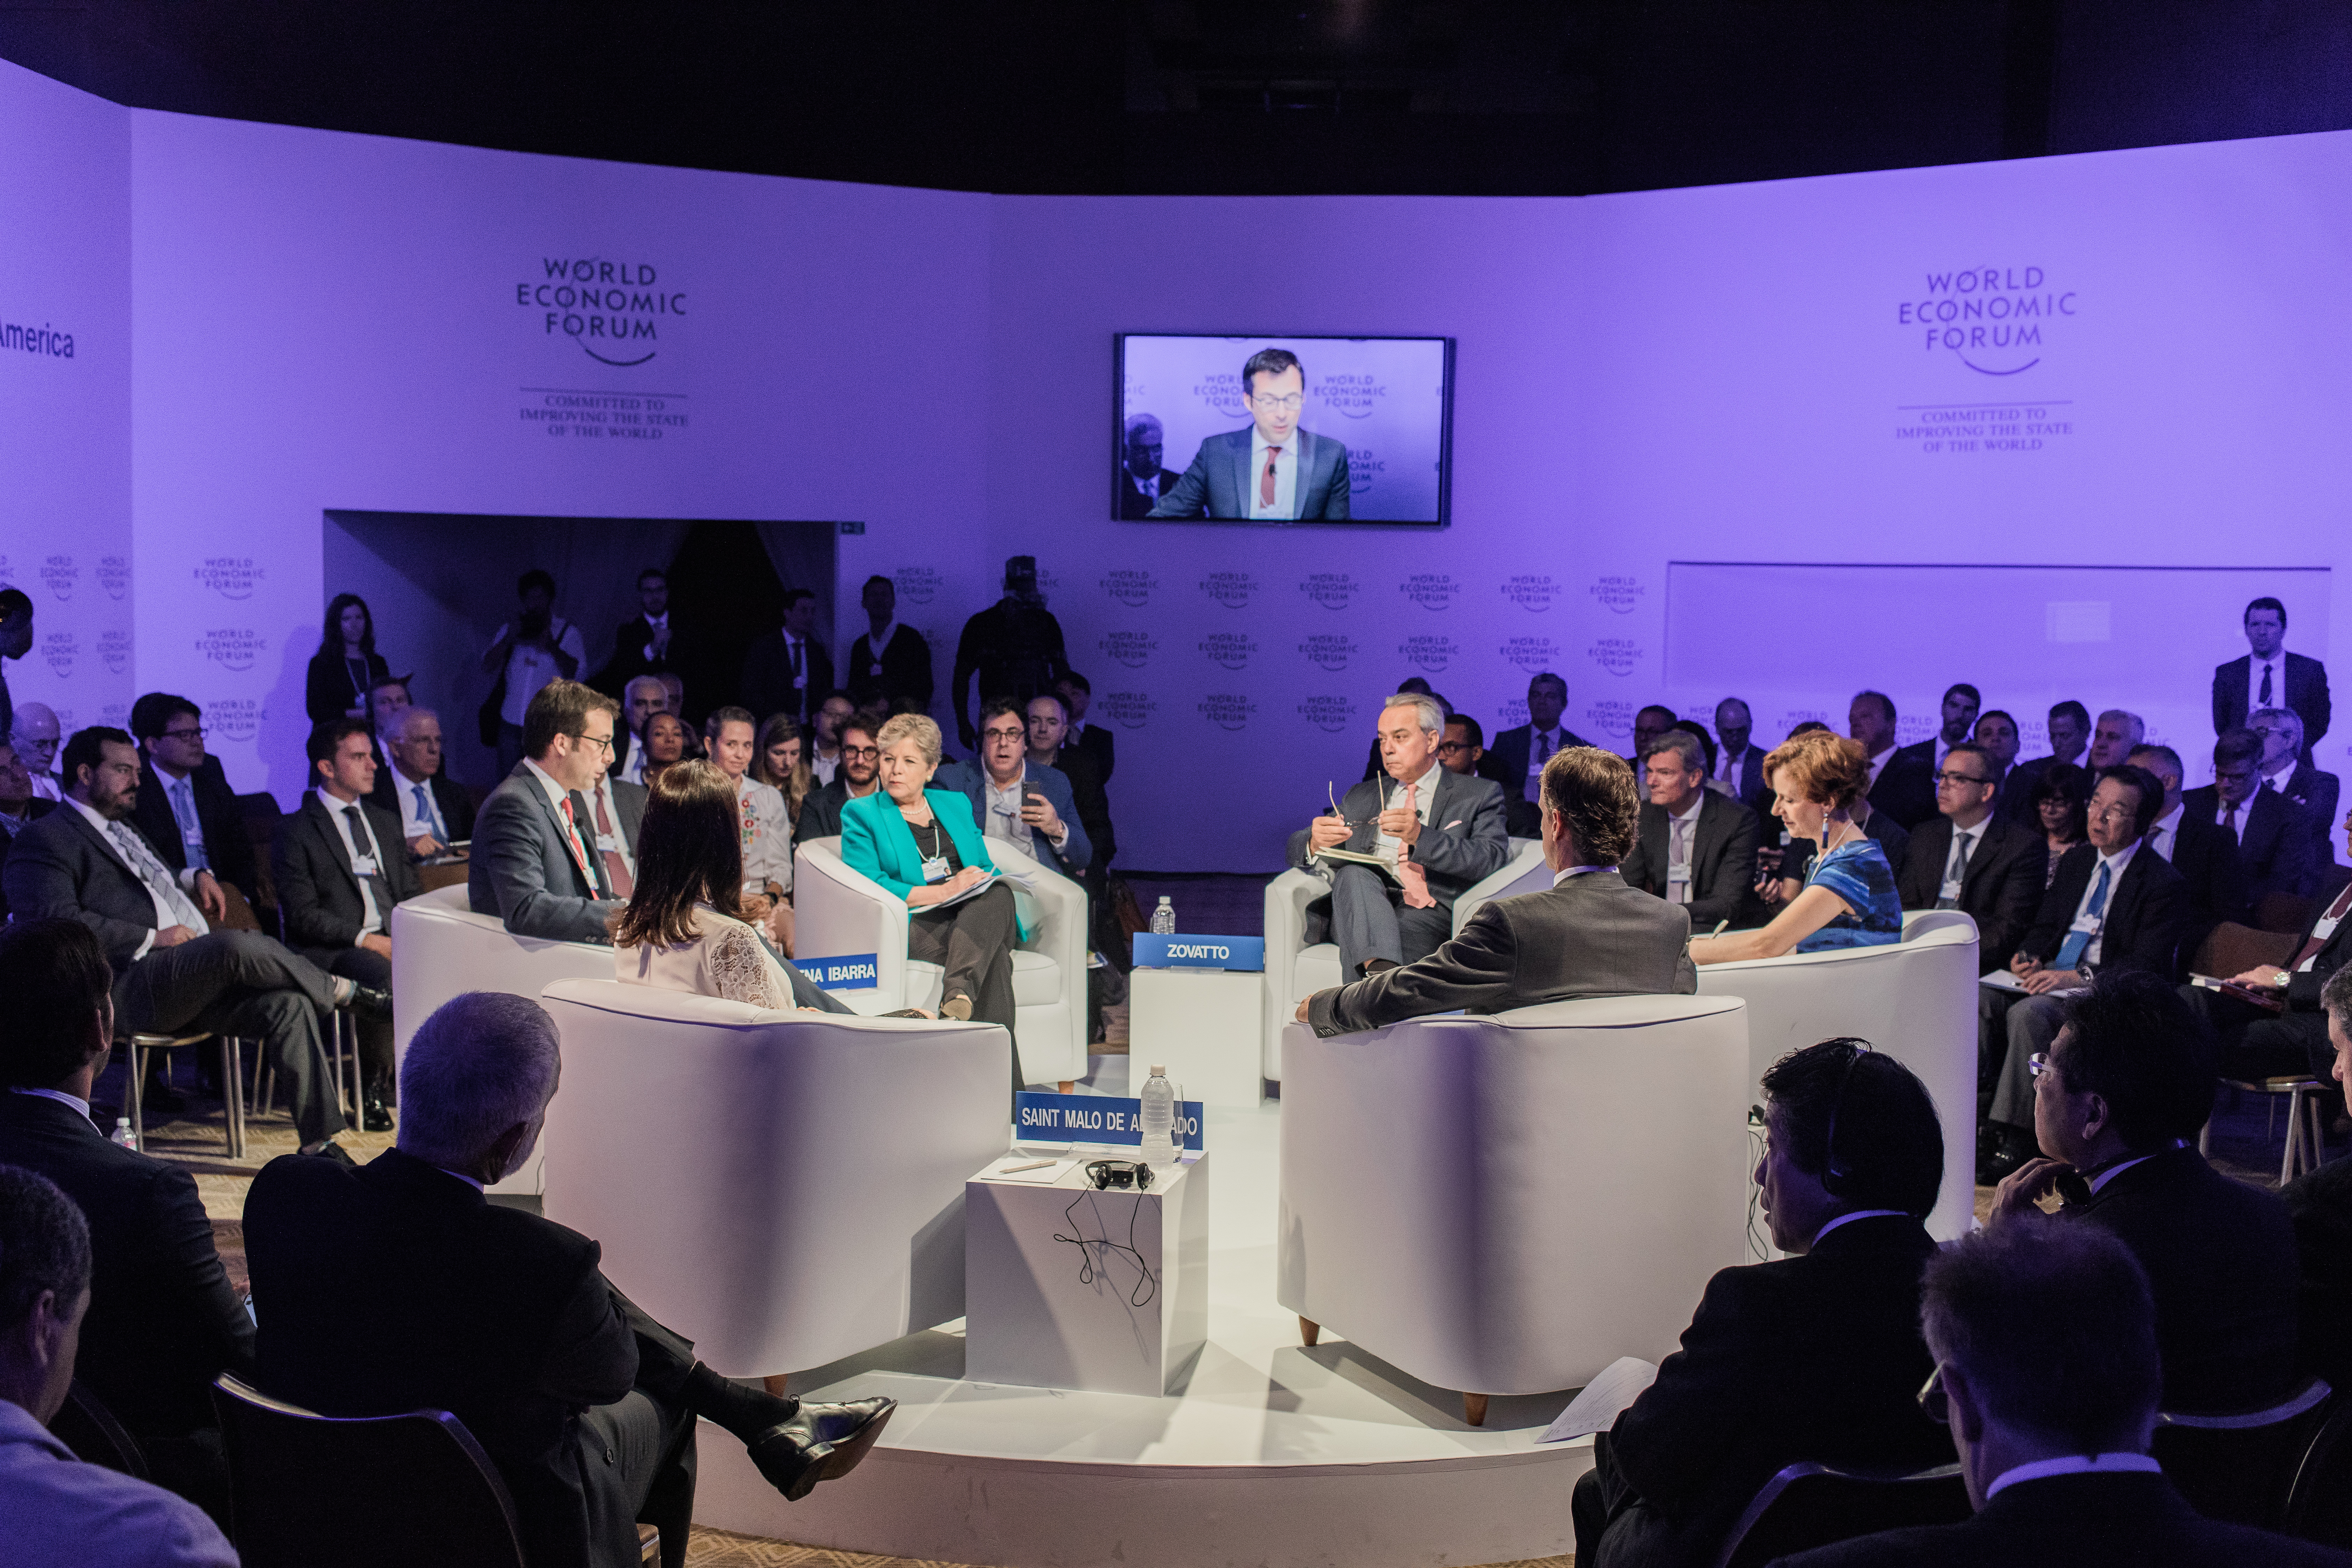 The panel members during the session ¨Latin America Update¨ at the World Economic Forum held in Sao Paulo between 13-15 March 2018. (Photo Credit: World Economic Forum)